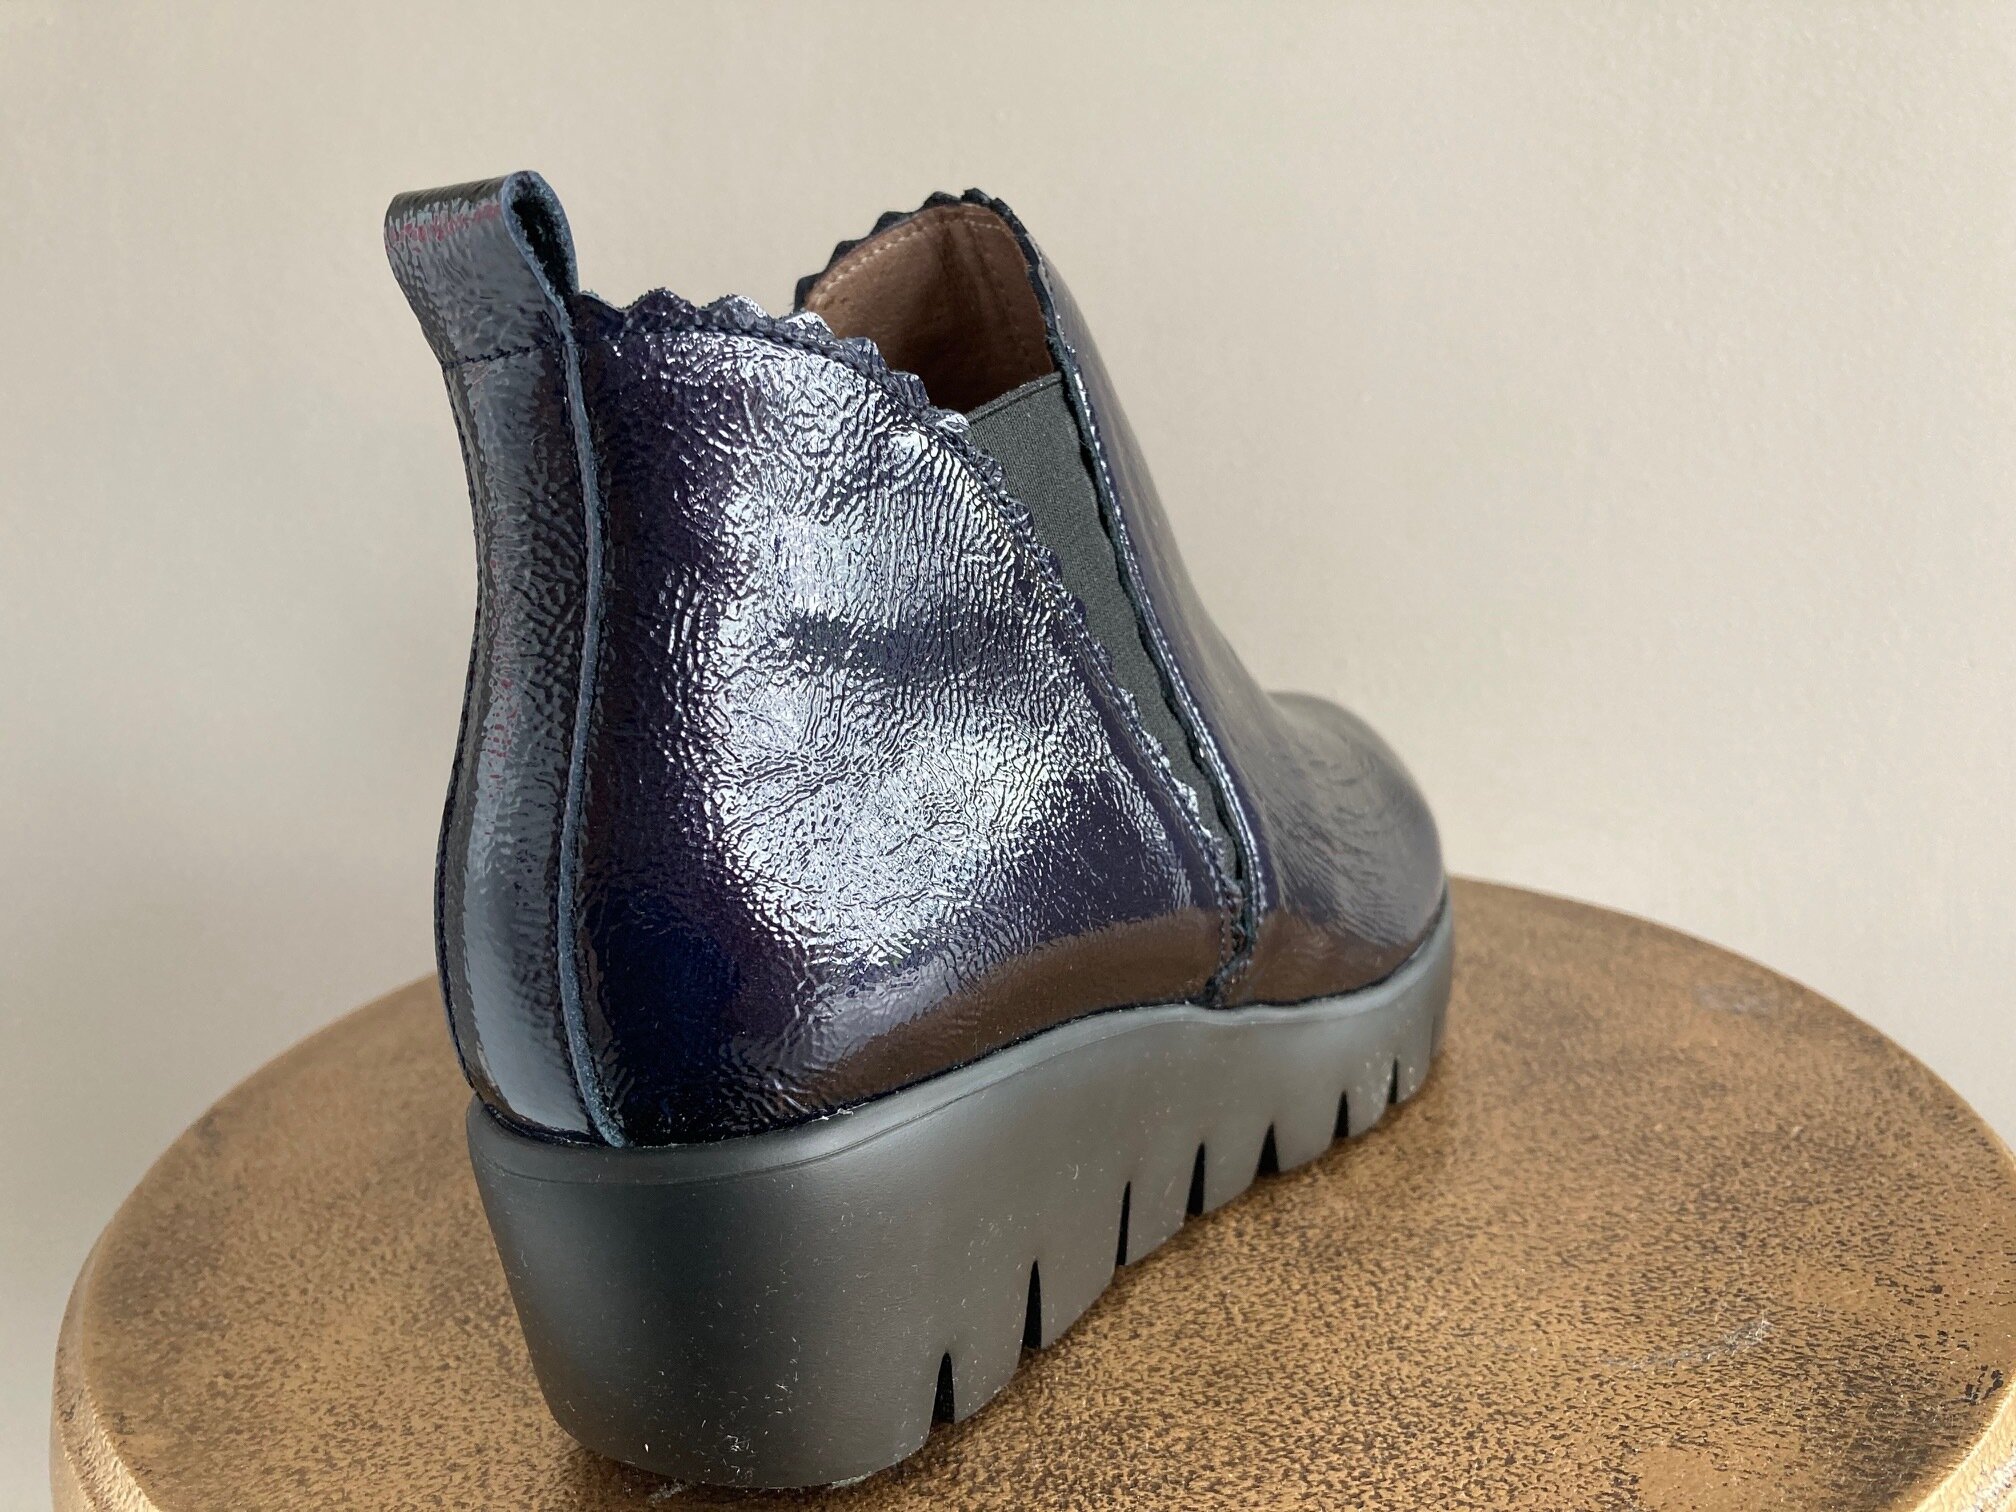 navy patent chelsea boots